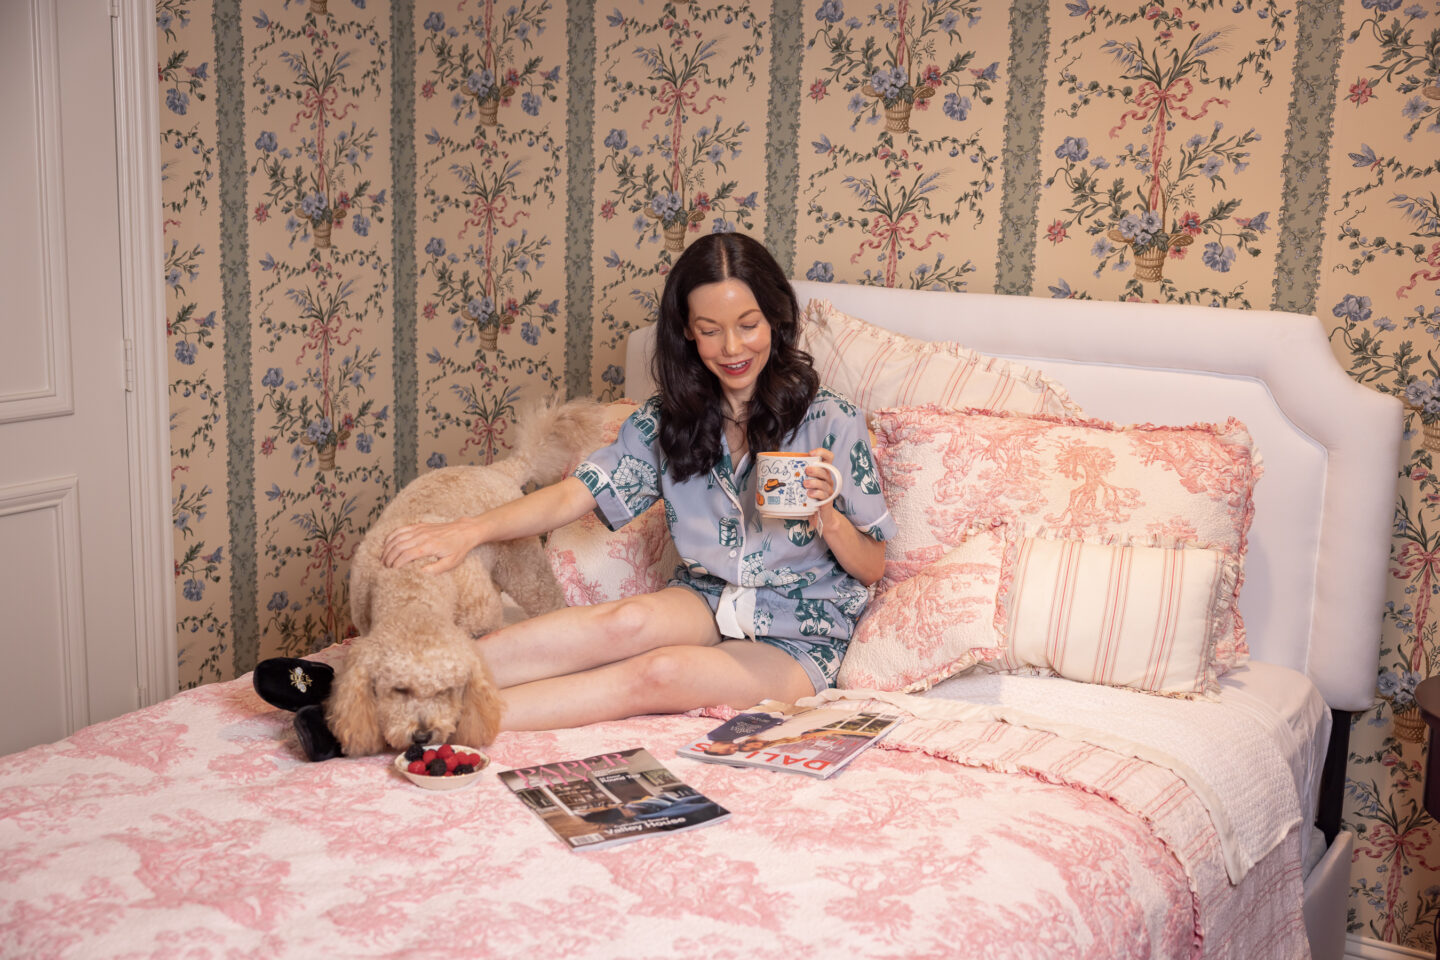 Dallas Lifestyle Blogger, Home Interiors, Guest Bedroom, Traditional Home Decor, Cottage Core, Grandmillennial Style, Floral Wallpaper, LoveShackFancy, Luxury Home, Katie Kime Pajamas, Toile Bedding, Patricia Green Slippers, Mini Goldendoodle Puppy